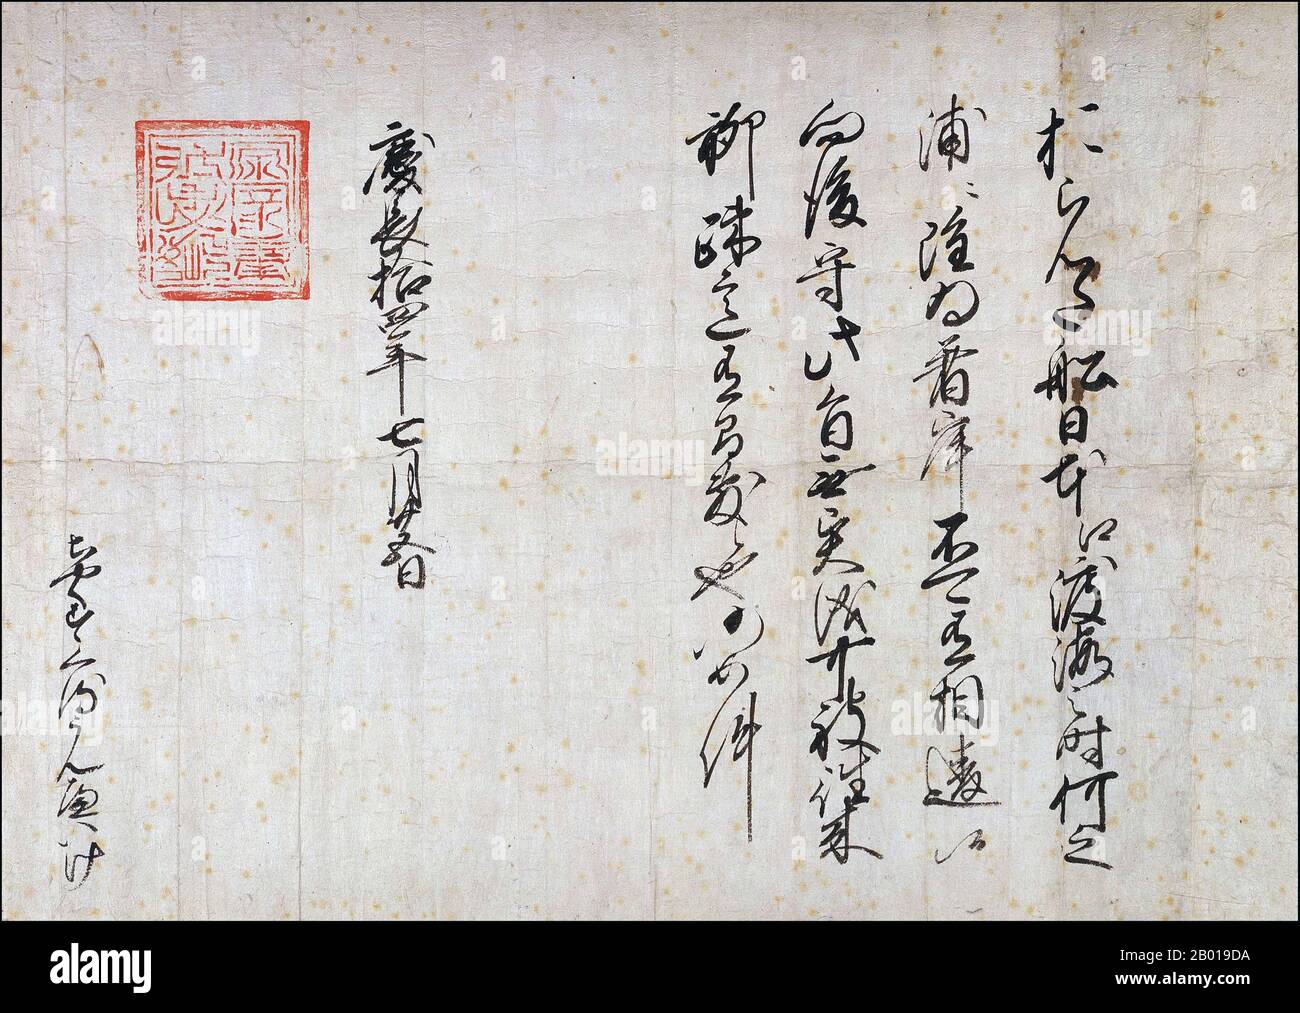 Japan: A trading pass for Dutch merchant vessels issued in the name of Tokugawa Ieyasu (1543-1616) by Chakusu Kurunbeike, with Ieyasu's seal attached, 24 August 1609.  The pass states: 'Dutch ships are allowed to travel to Japan, and they can disembark on any coast, without any reserve. From now on this regulation must be observed, and the Dutch left free to sail where they want throughout Japan. No offenses to them will be allowed, such as on previous occasions.'  Ieyasu, acting as the retired shogun (ōgosho), remained the effective ruler of Japan until his death. Stock Photo